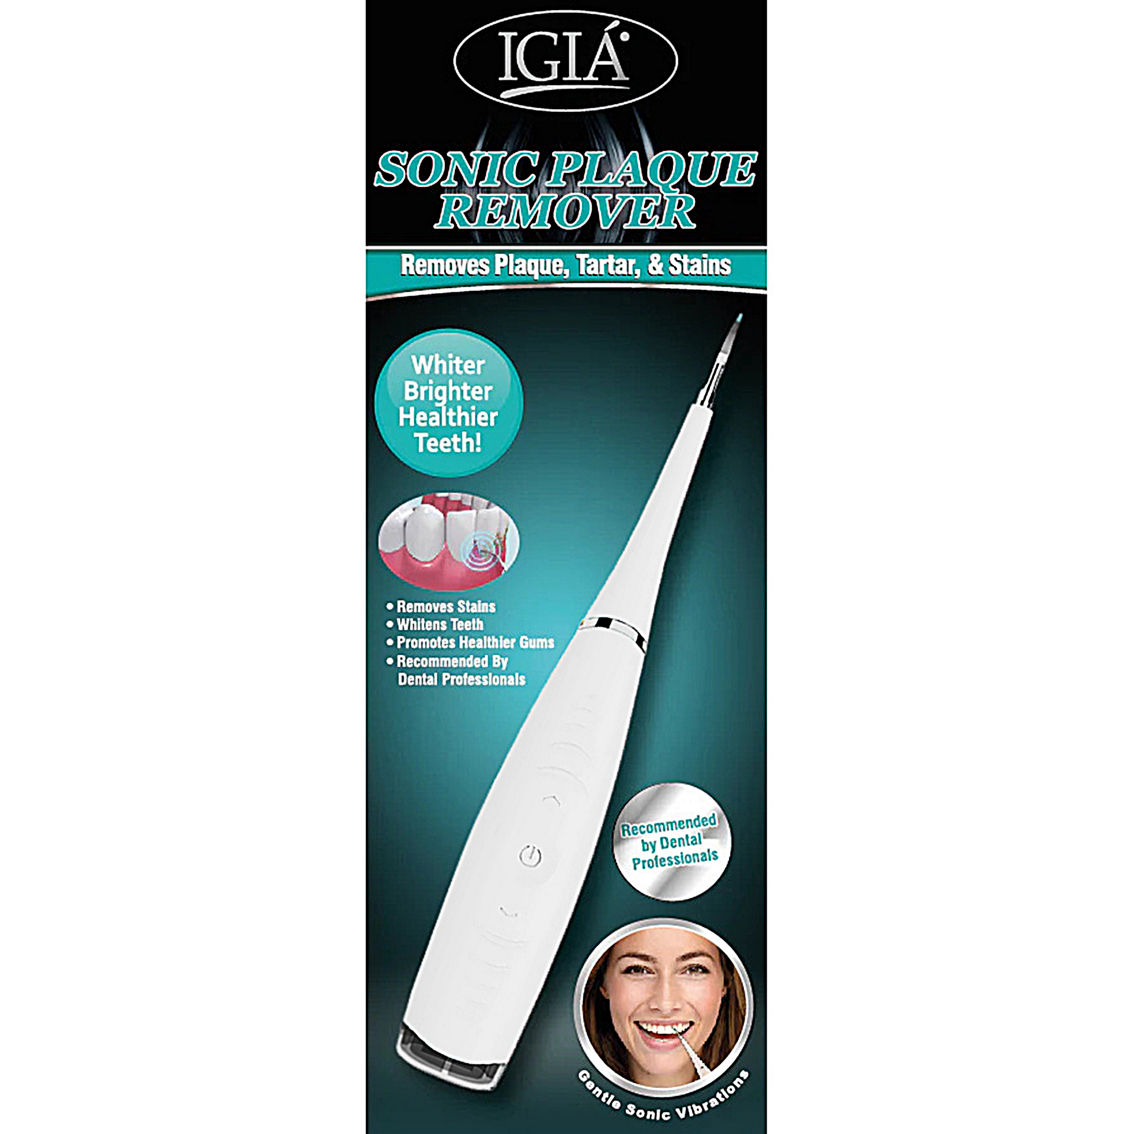 IGIA Sonic Plaque Remover Rechargeable - Image 2 of 4